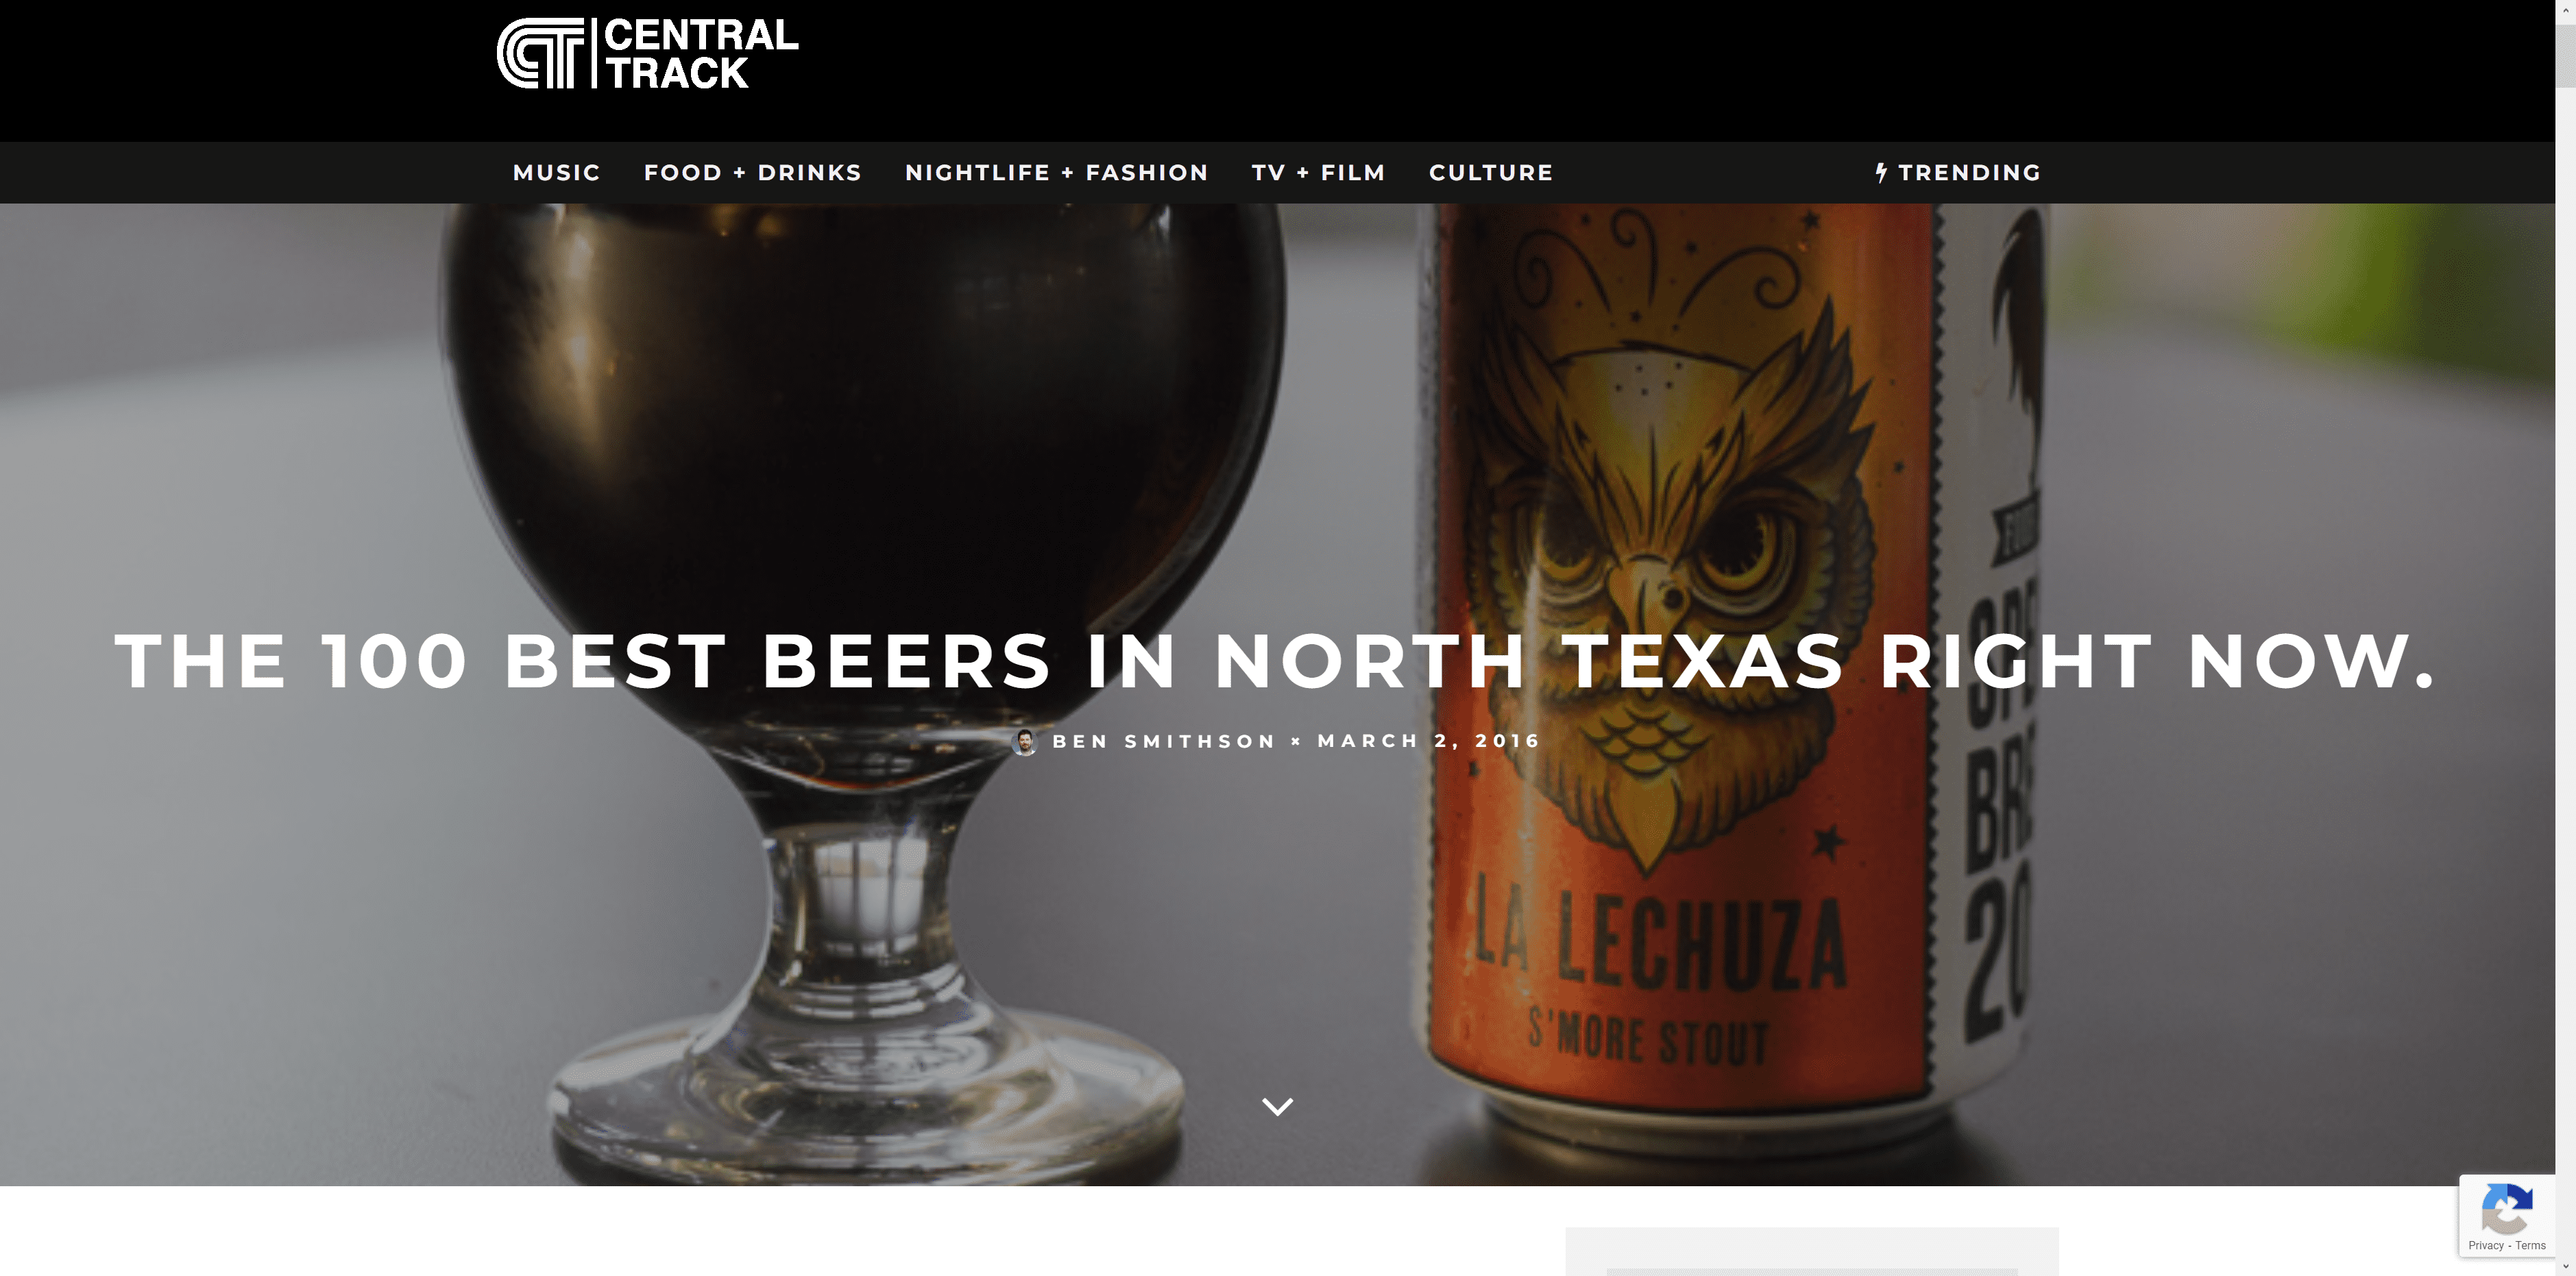 100 Best Beers in North Texas right now in Central Track